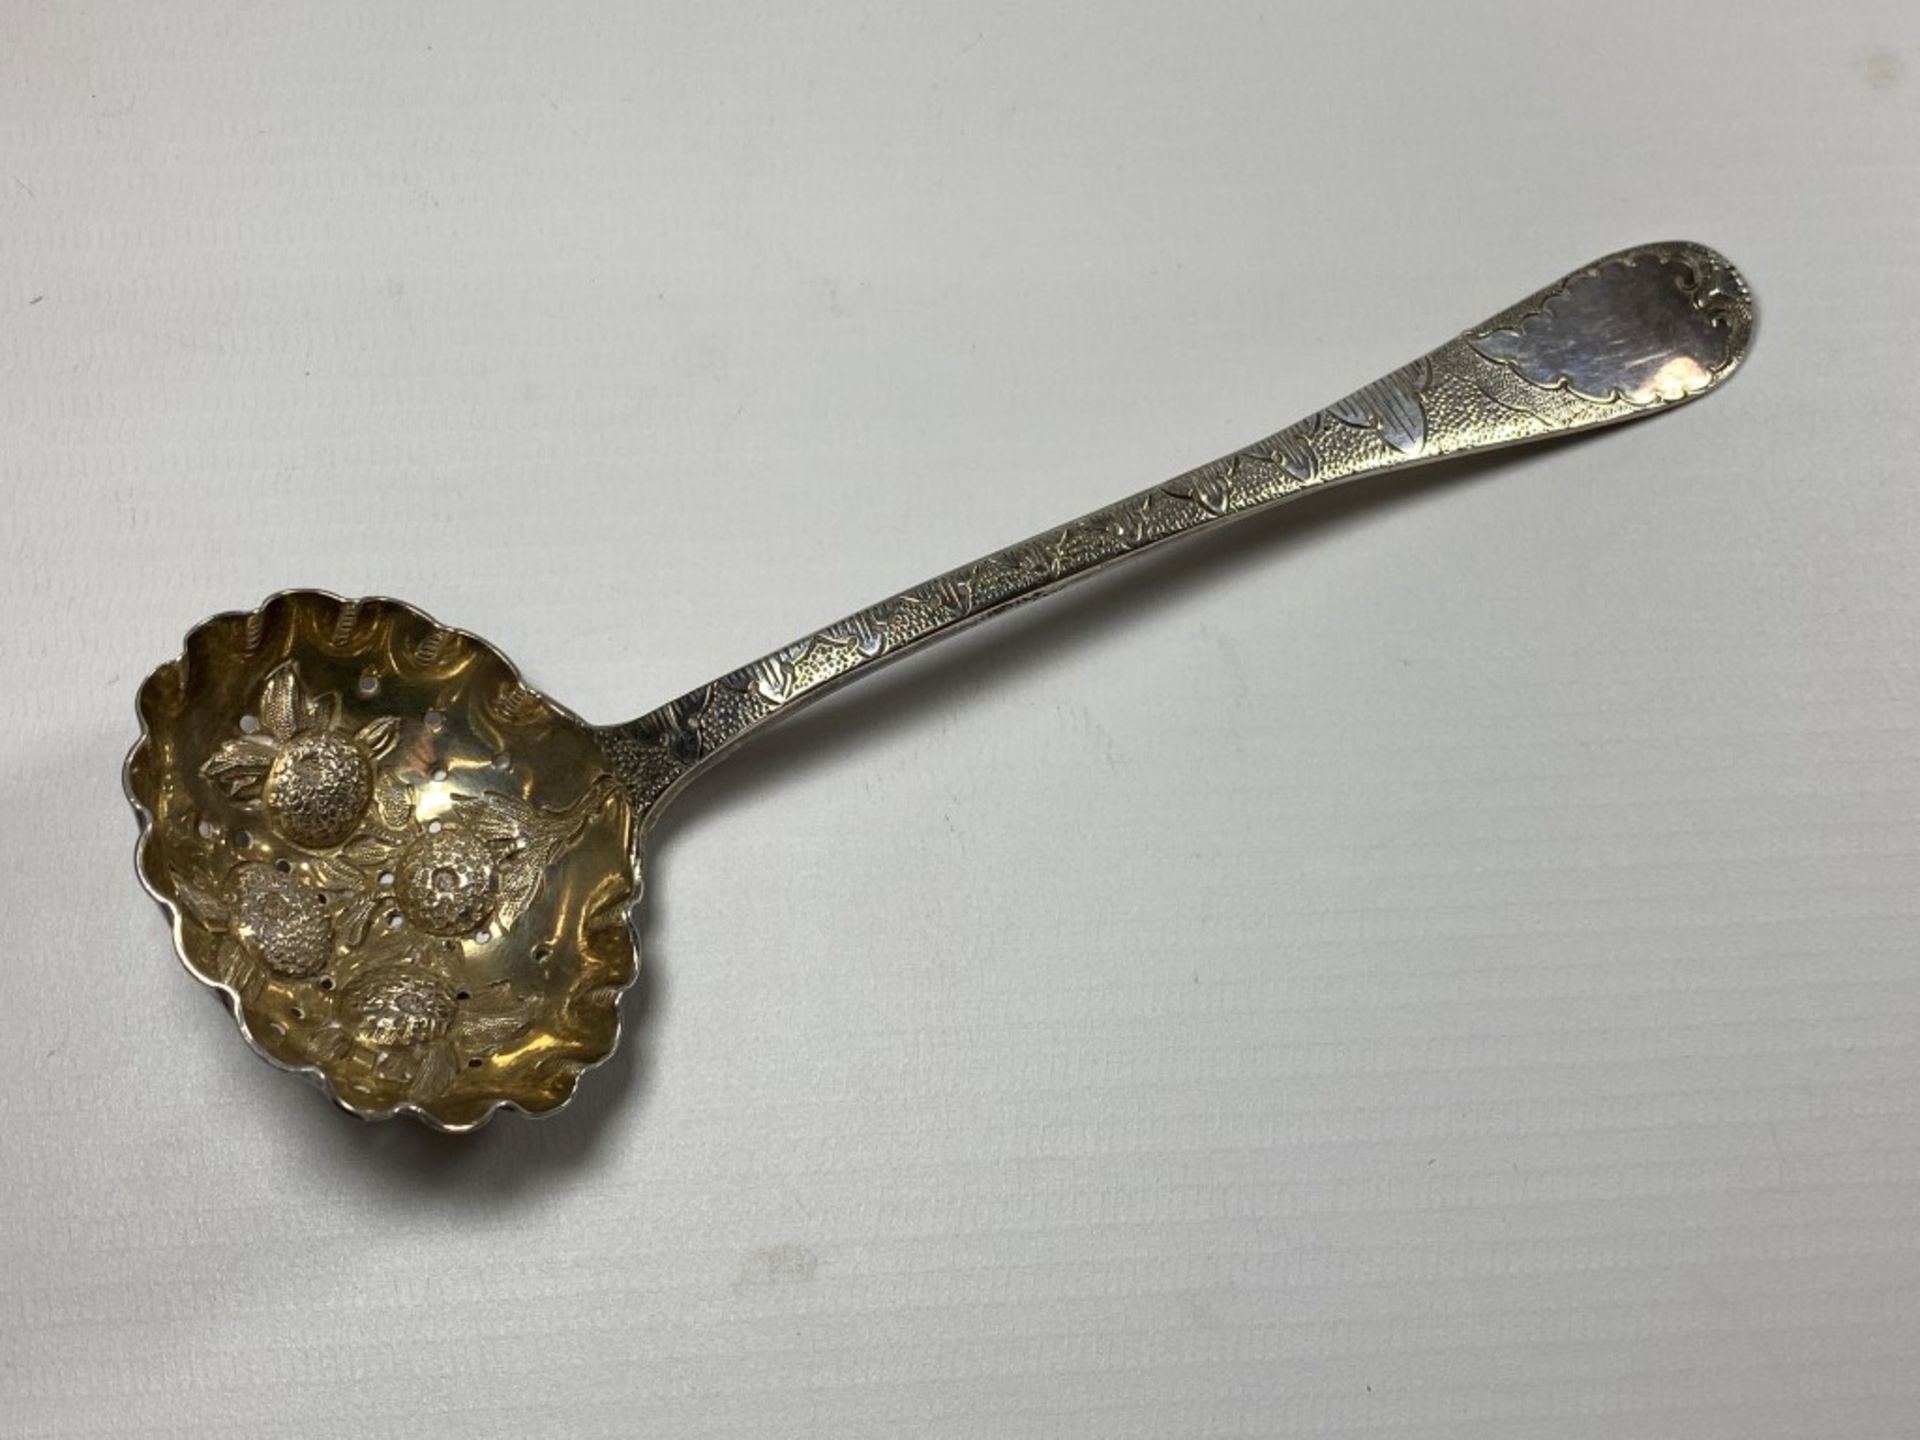 A WILLIAM IV SILVER BERRY SPOON, DATES TO LONDON, 1836, MAKER MARY CHAWNER (WIDOW OF WILLIAM CHAWNER